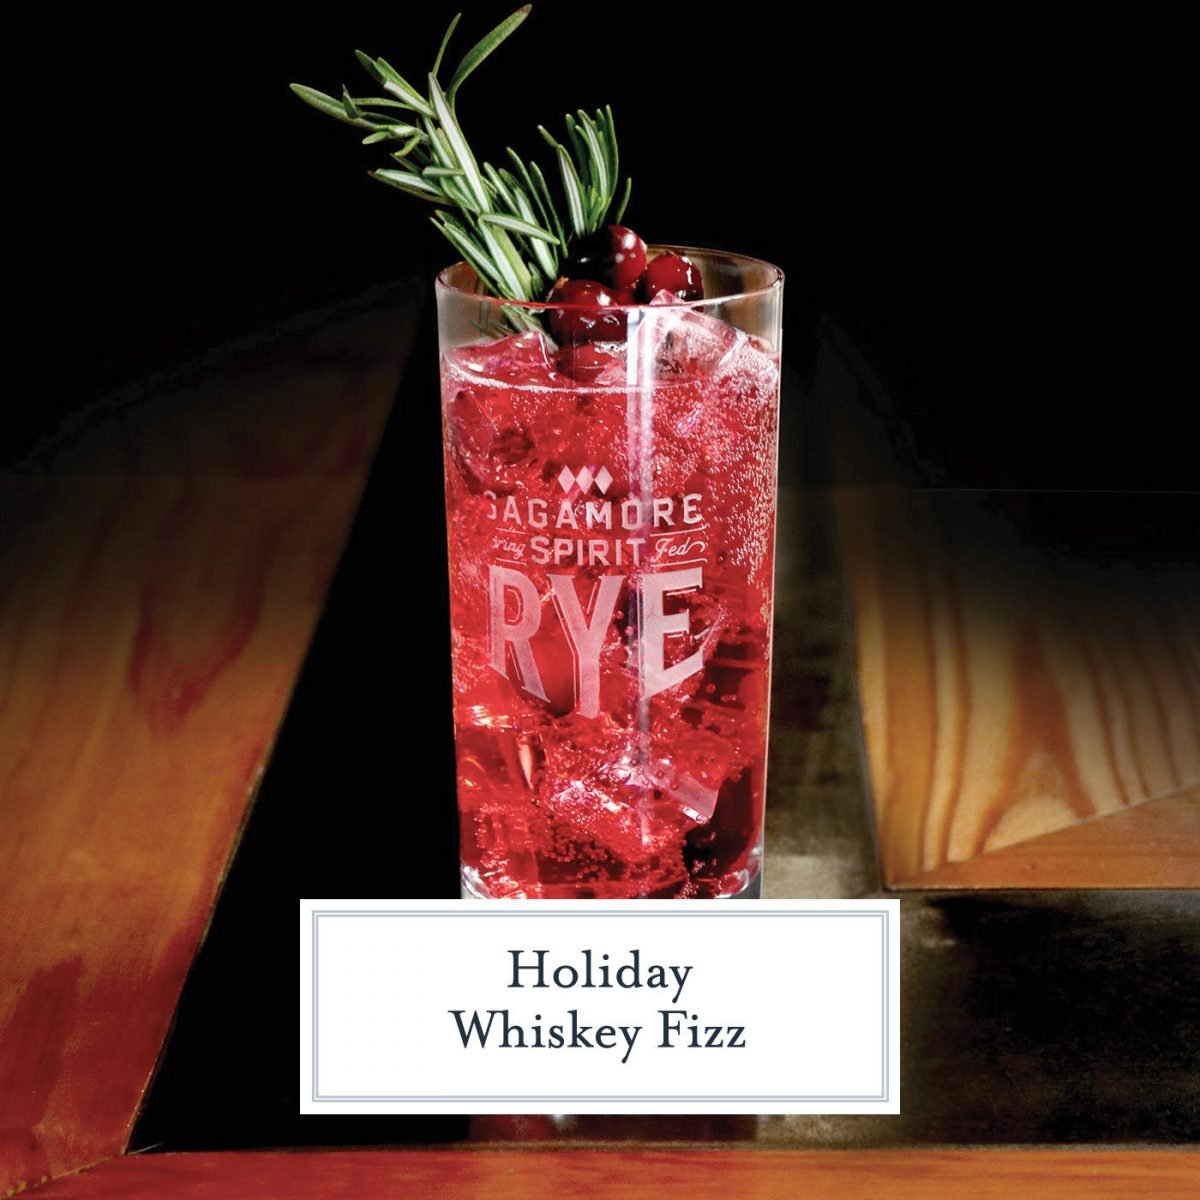 Holiday Whiskey Fizz is a bubbly holiday cocktail featuring Sagamore Spirits rye whiskey, club soda, cranberry syrup and lime juice. #whiskeycocktails #whiskey www.savoryexperiments.com